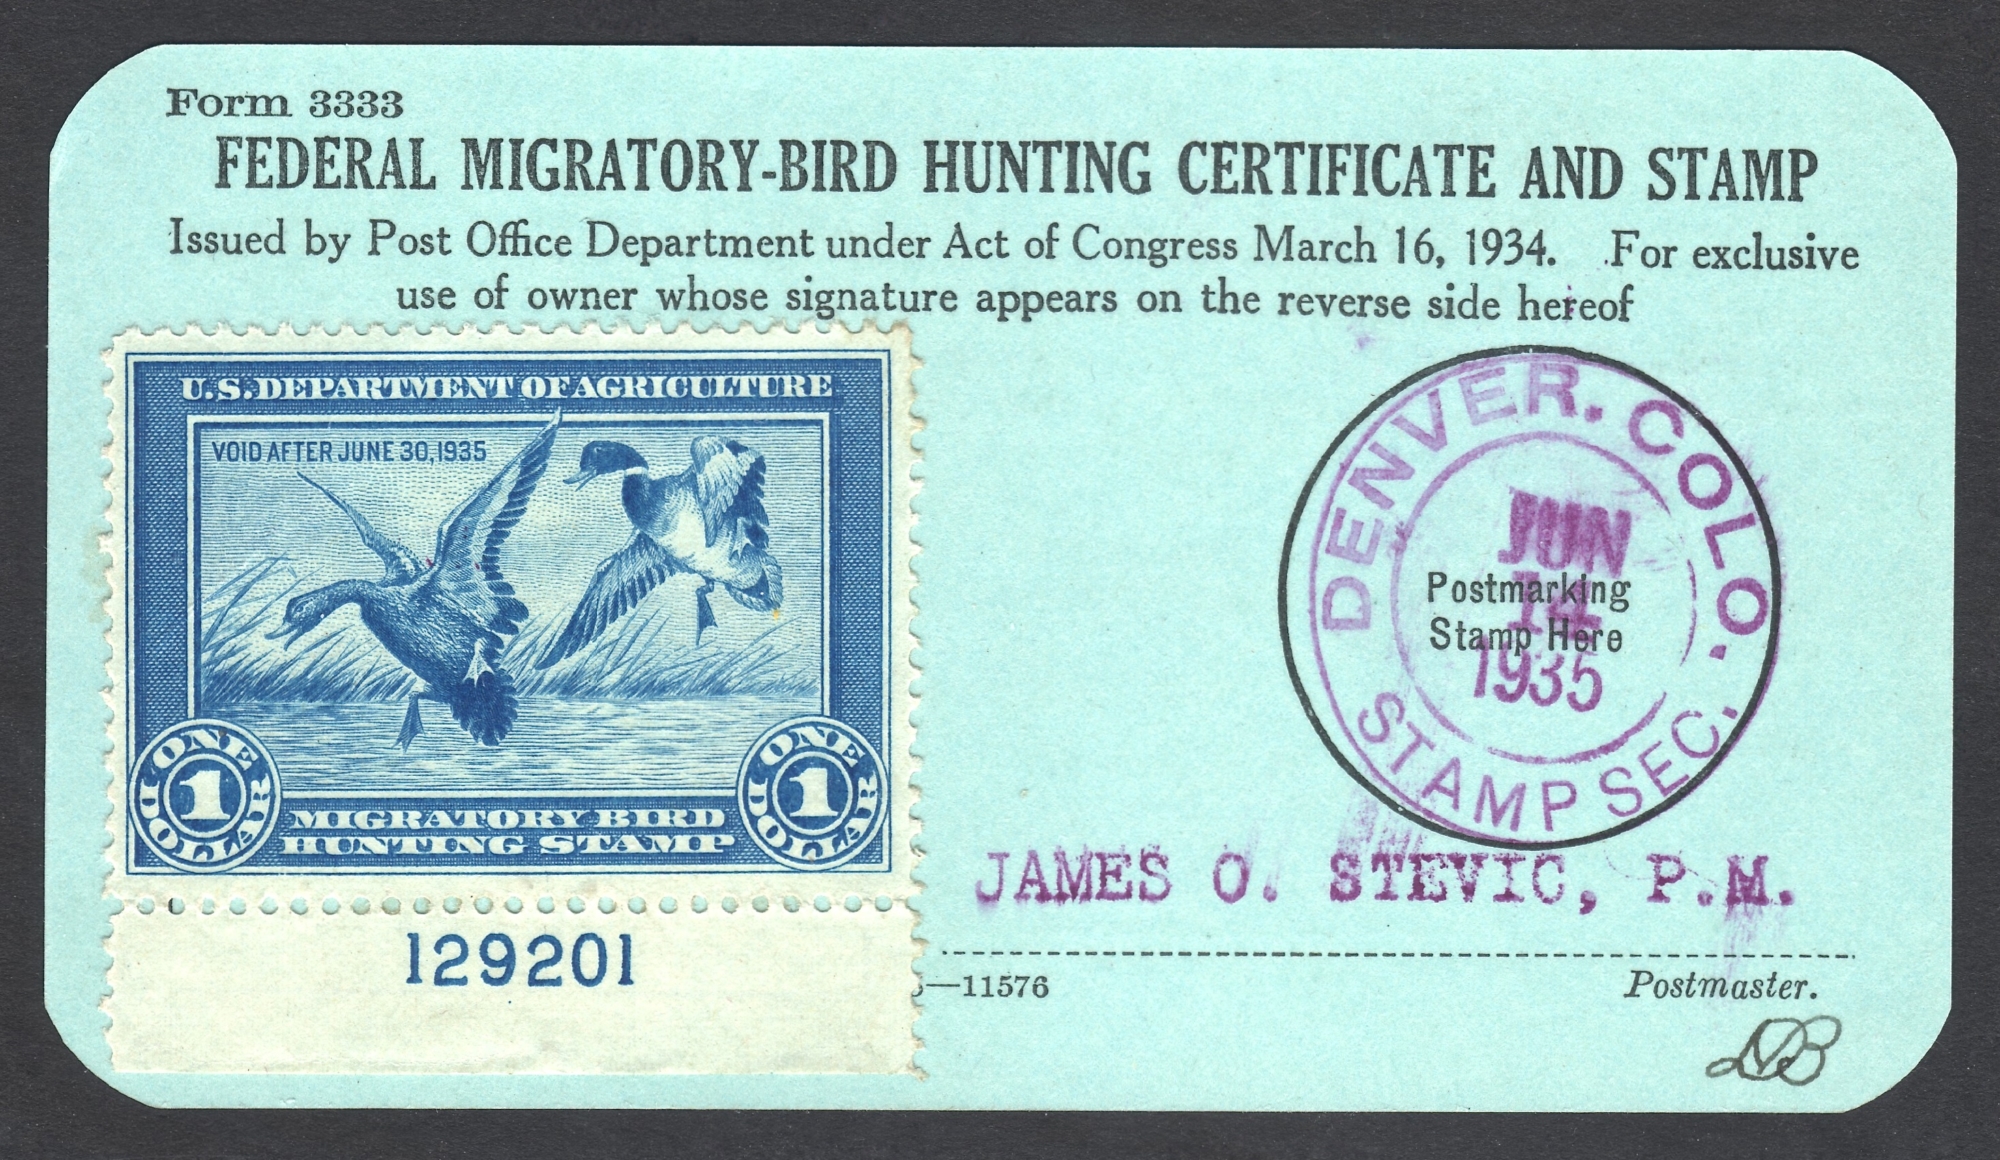 RW1 on Form 3333, cancelled June 14, 1935 at Denver, Colorado (STAMP SECTION)